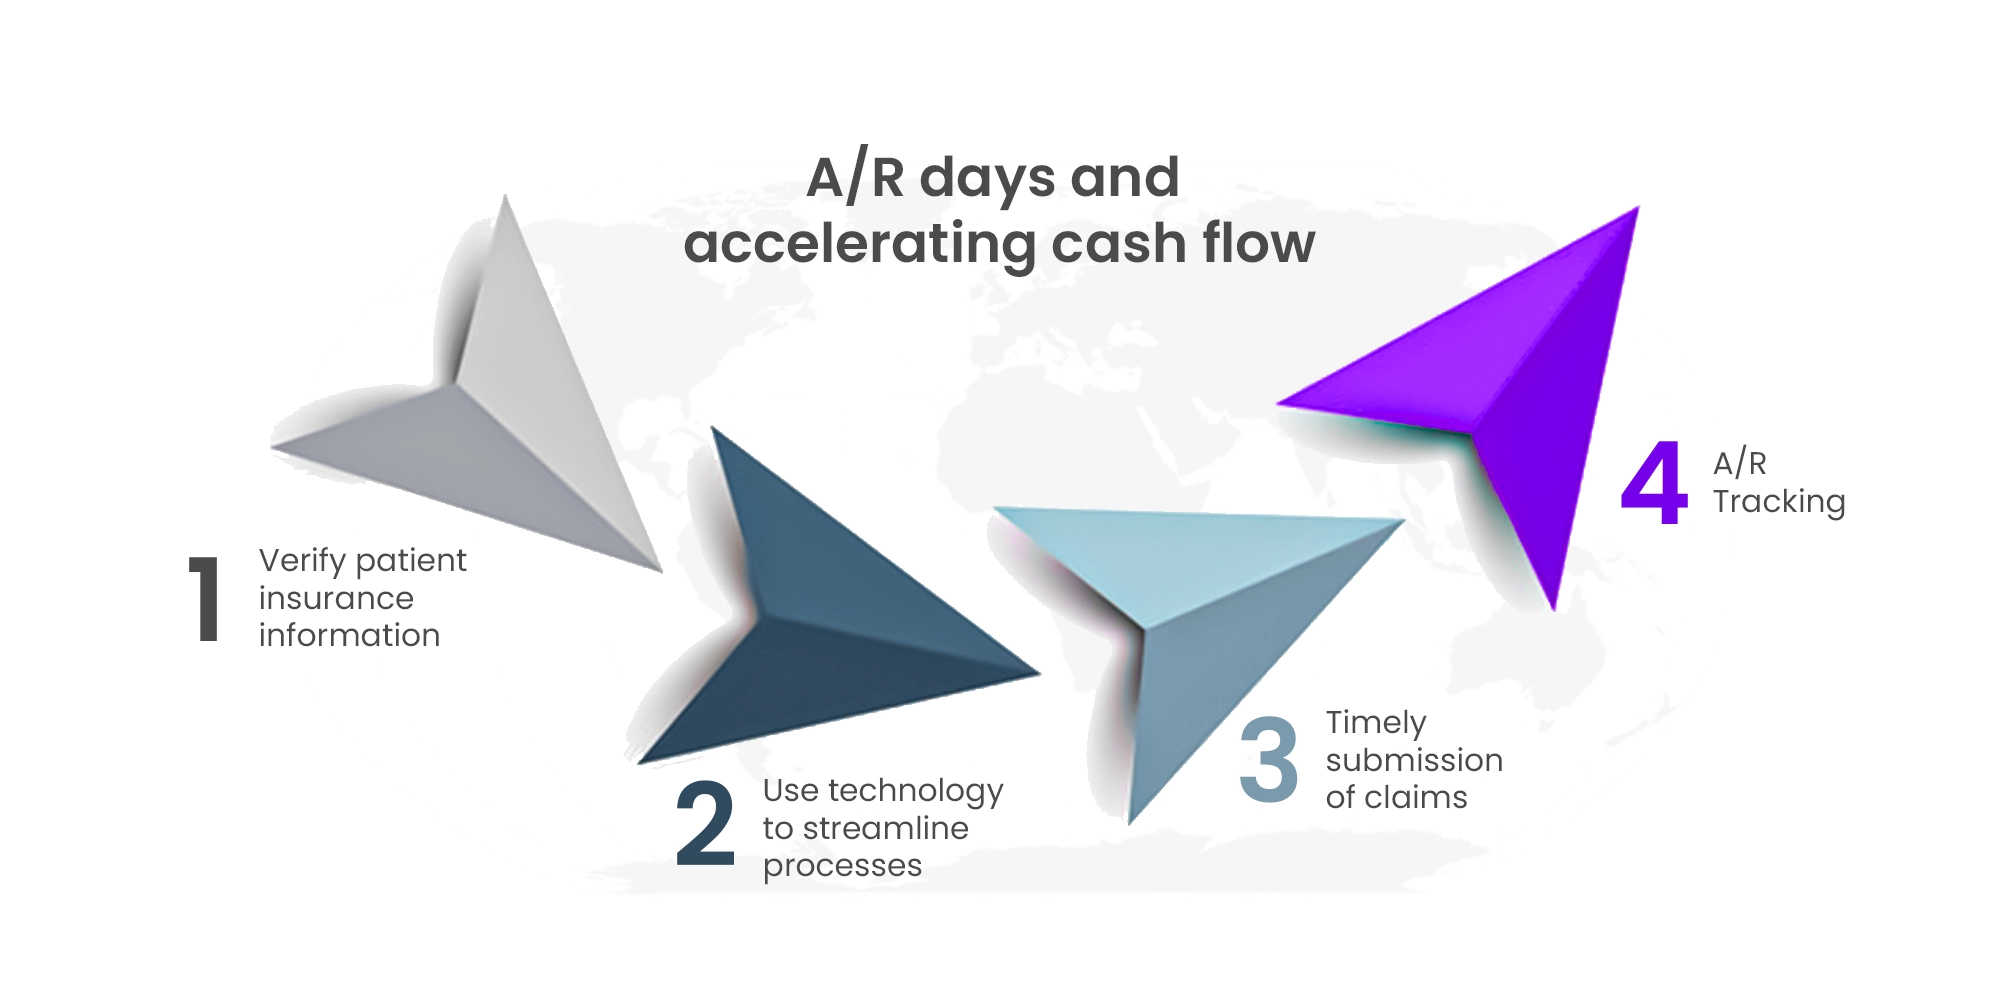 Reducing A/R days and accelerating cash flow